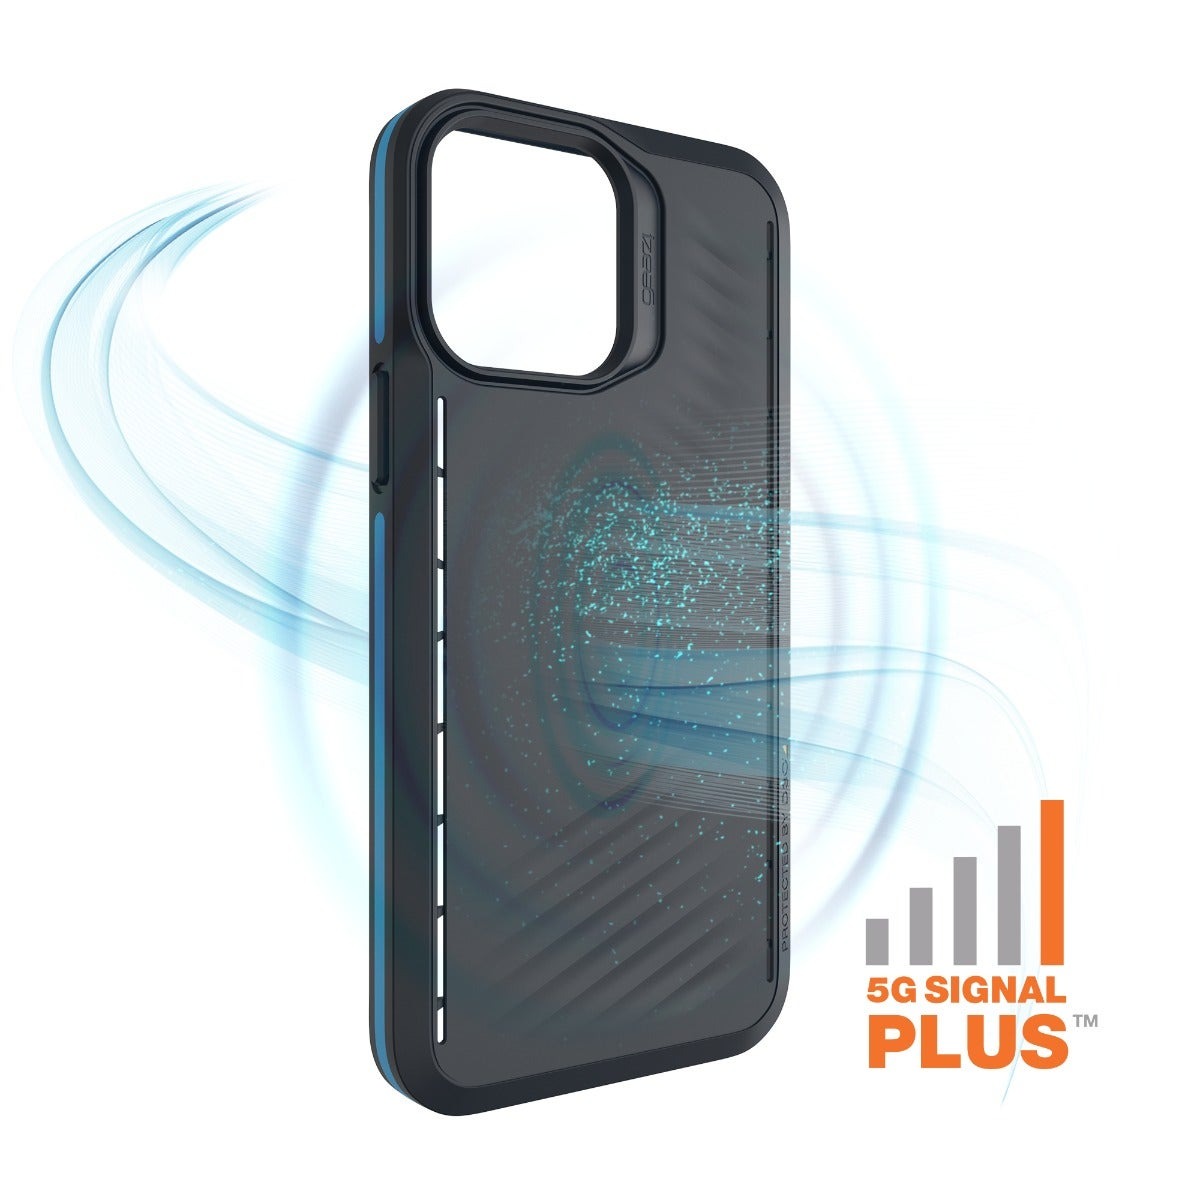 5G Signal Plus™ Technology||Micro voids in this uniquely engineered D3O® material allows the 5G signal to pass through successfully.